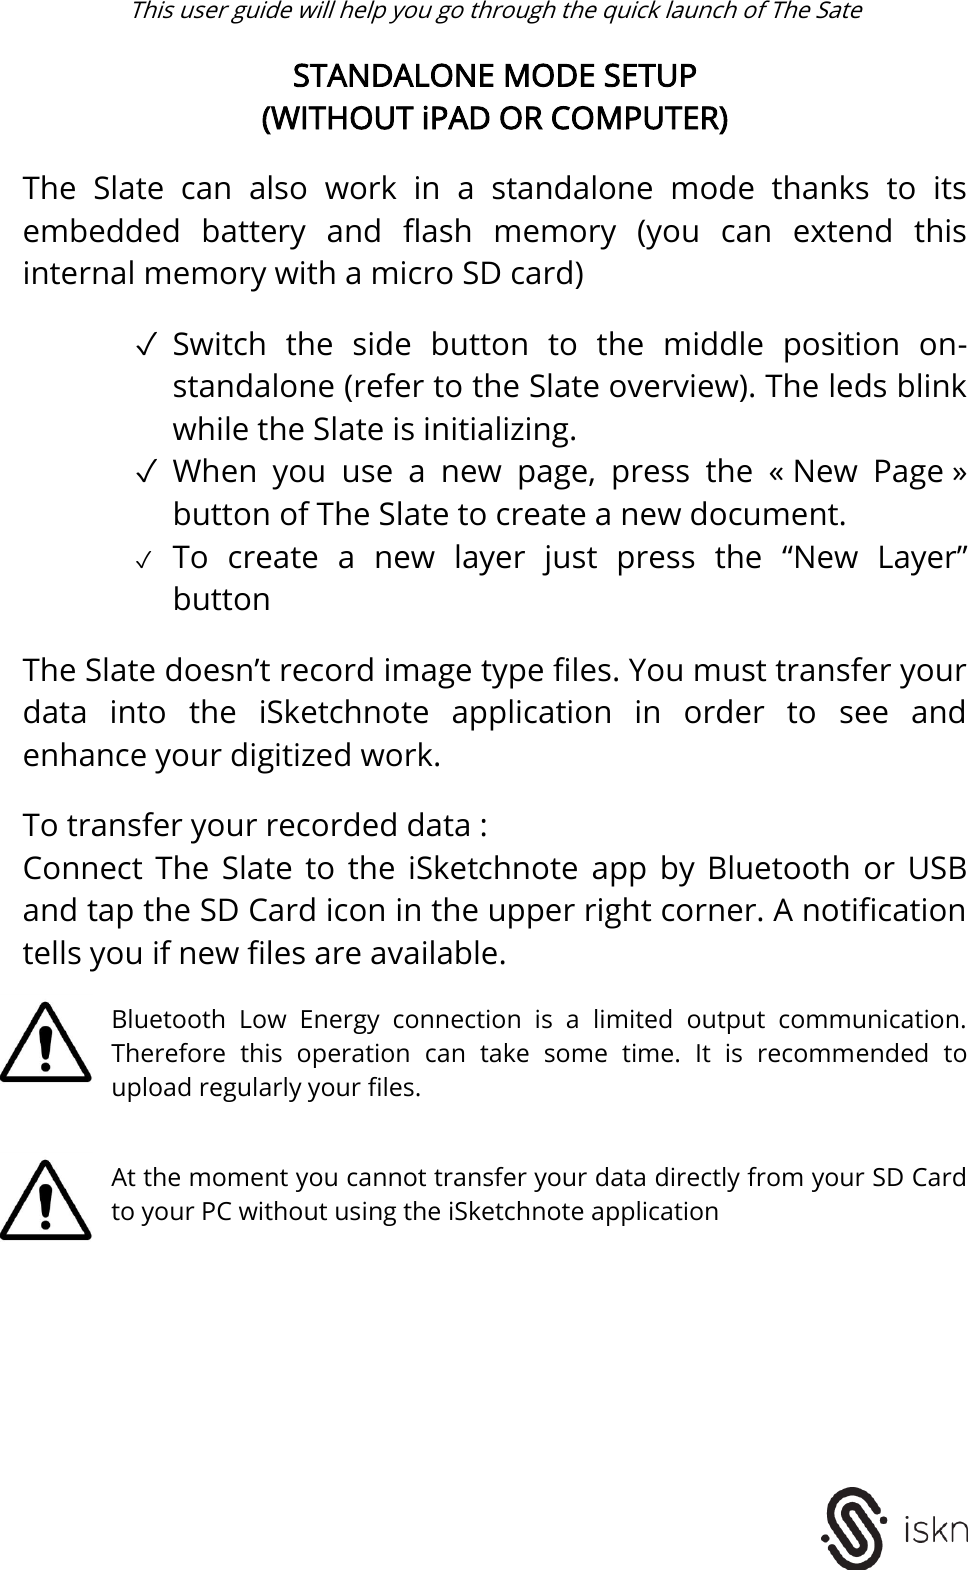  This user guide will help you go through the quick launch of The Sate   STANDALONE MODE SETUP (WITHOUT iPAD OR COMPUTER)  The  Slate  can  also  work  in  a  standalone  mode  thanks  to  its embedded  battery  and  flash  memory  (you  can  extend  this internal memory with a micro SD card)  ✓ Switch  the  side  button  to  the  middle  position  on-standalone (refer to the Slate overview). The leds blink while the Slate is initializing. ✓ When  you  use  a  new  page,  press  the  « New  Page » button of The Slate to create a new document.  ✓ To  create  a  new  layer  just  press  the  “New  Layer” button  The Slate doesn’t record image type files. You must transfer your data  into  the  iSketchnote  application  in  order  to  see  and enhance your digitized work.  To transfer your recorded data : Connect  The  Slate  to  the  iSketchnote  app  by  Bluetooth  or  USB and tap the SD Card icon in the upper right corner. A notification tells you if new files are available.  Bluetooth  Low  Energy  connection  is  a  limited  output  communication. Therefore  this  operation  can  take  some  time.  It  is  recommended  to upload regularly your files.   At the moment you cannot transfer your data directly from your SD Card to your PC without using the iSketchnote application          